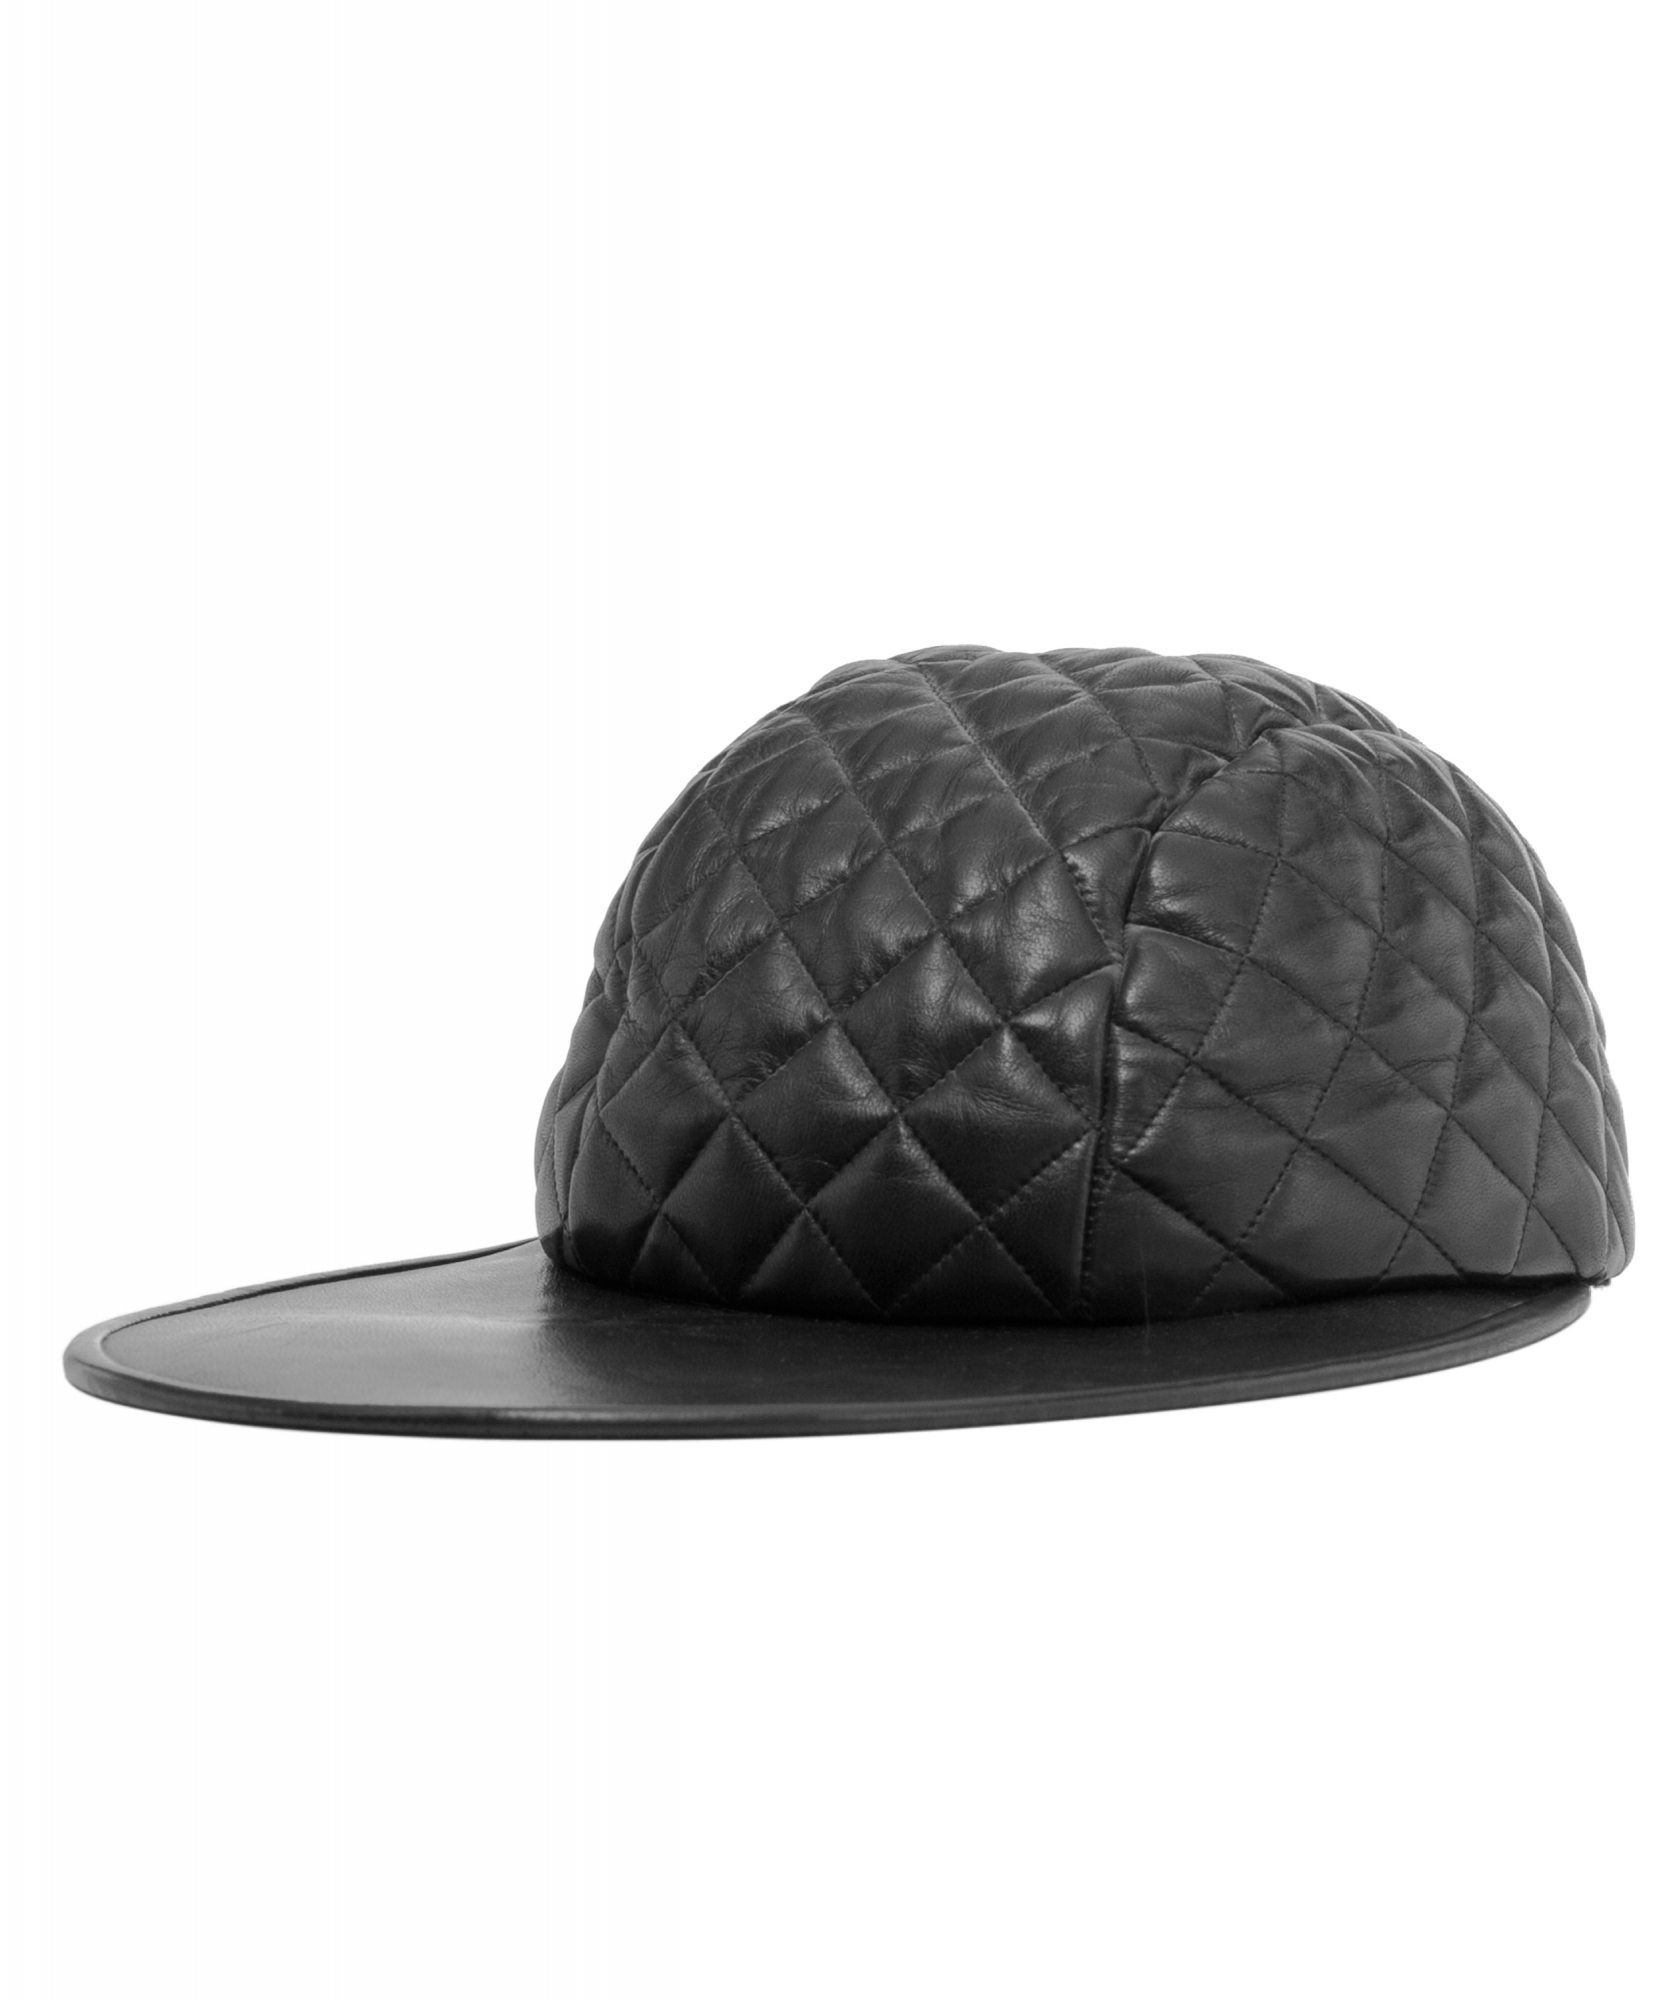 Chanel Black Quilted Leather Baseball Cap - Chanel | ArtListings